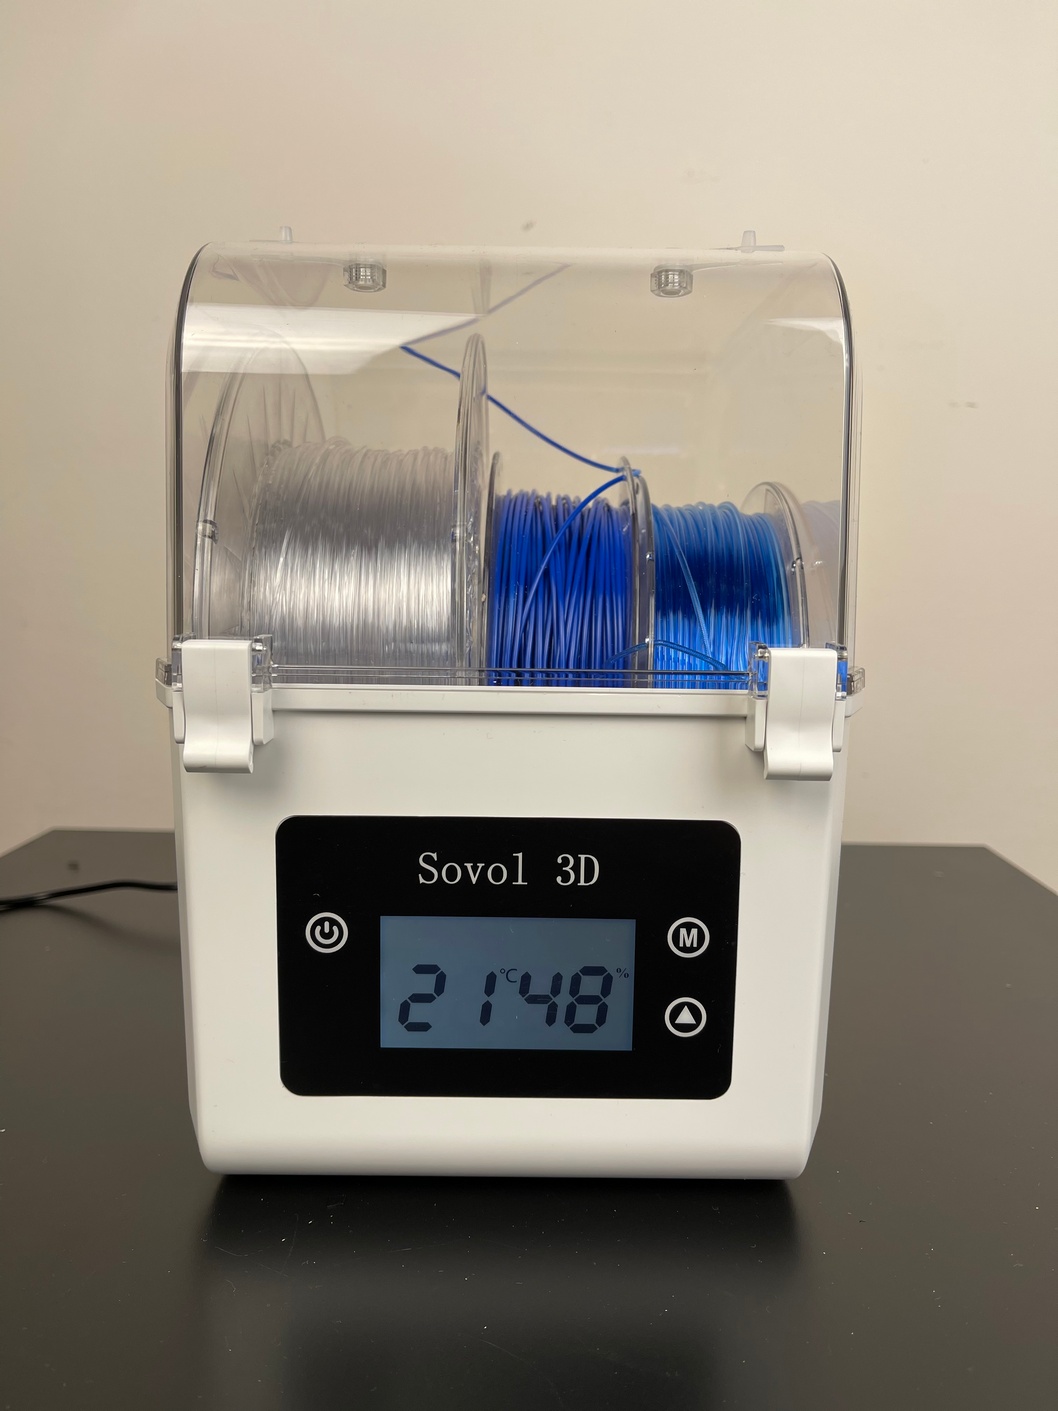 Sovol Filament Drier Before | Sovol Filament Dryer Review: Does it really work?